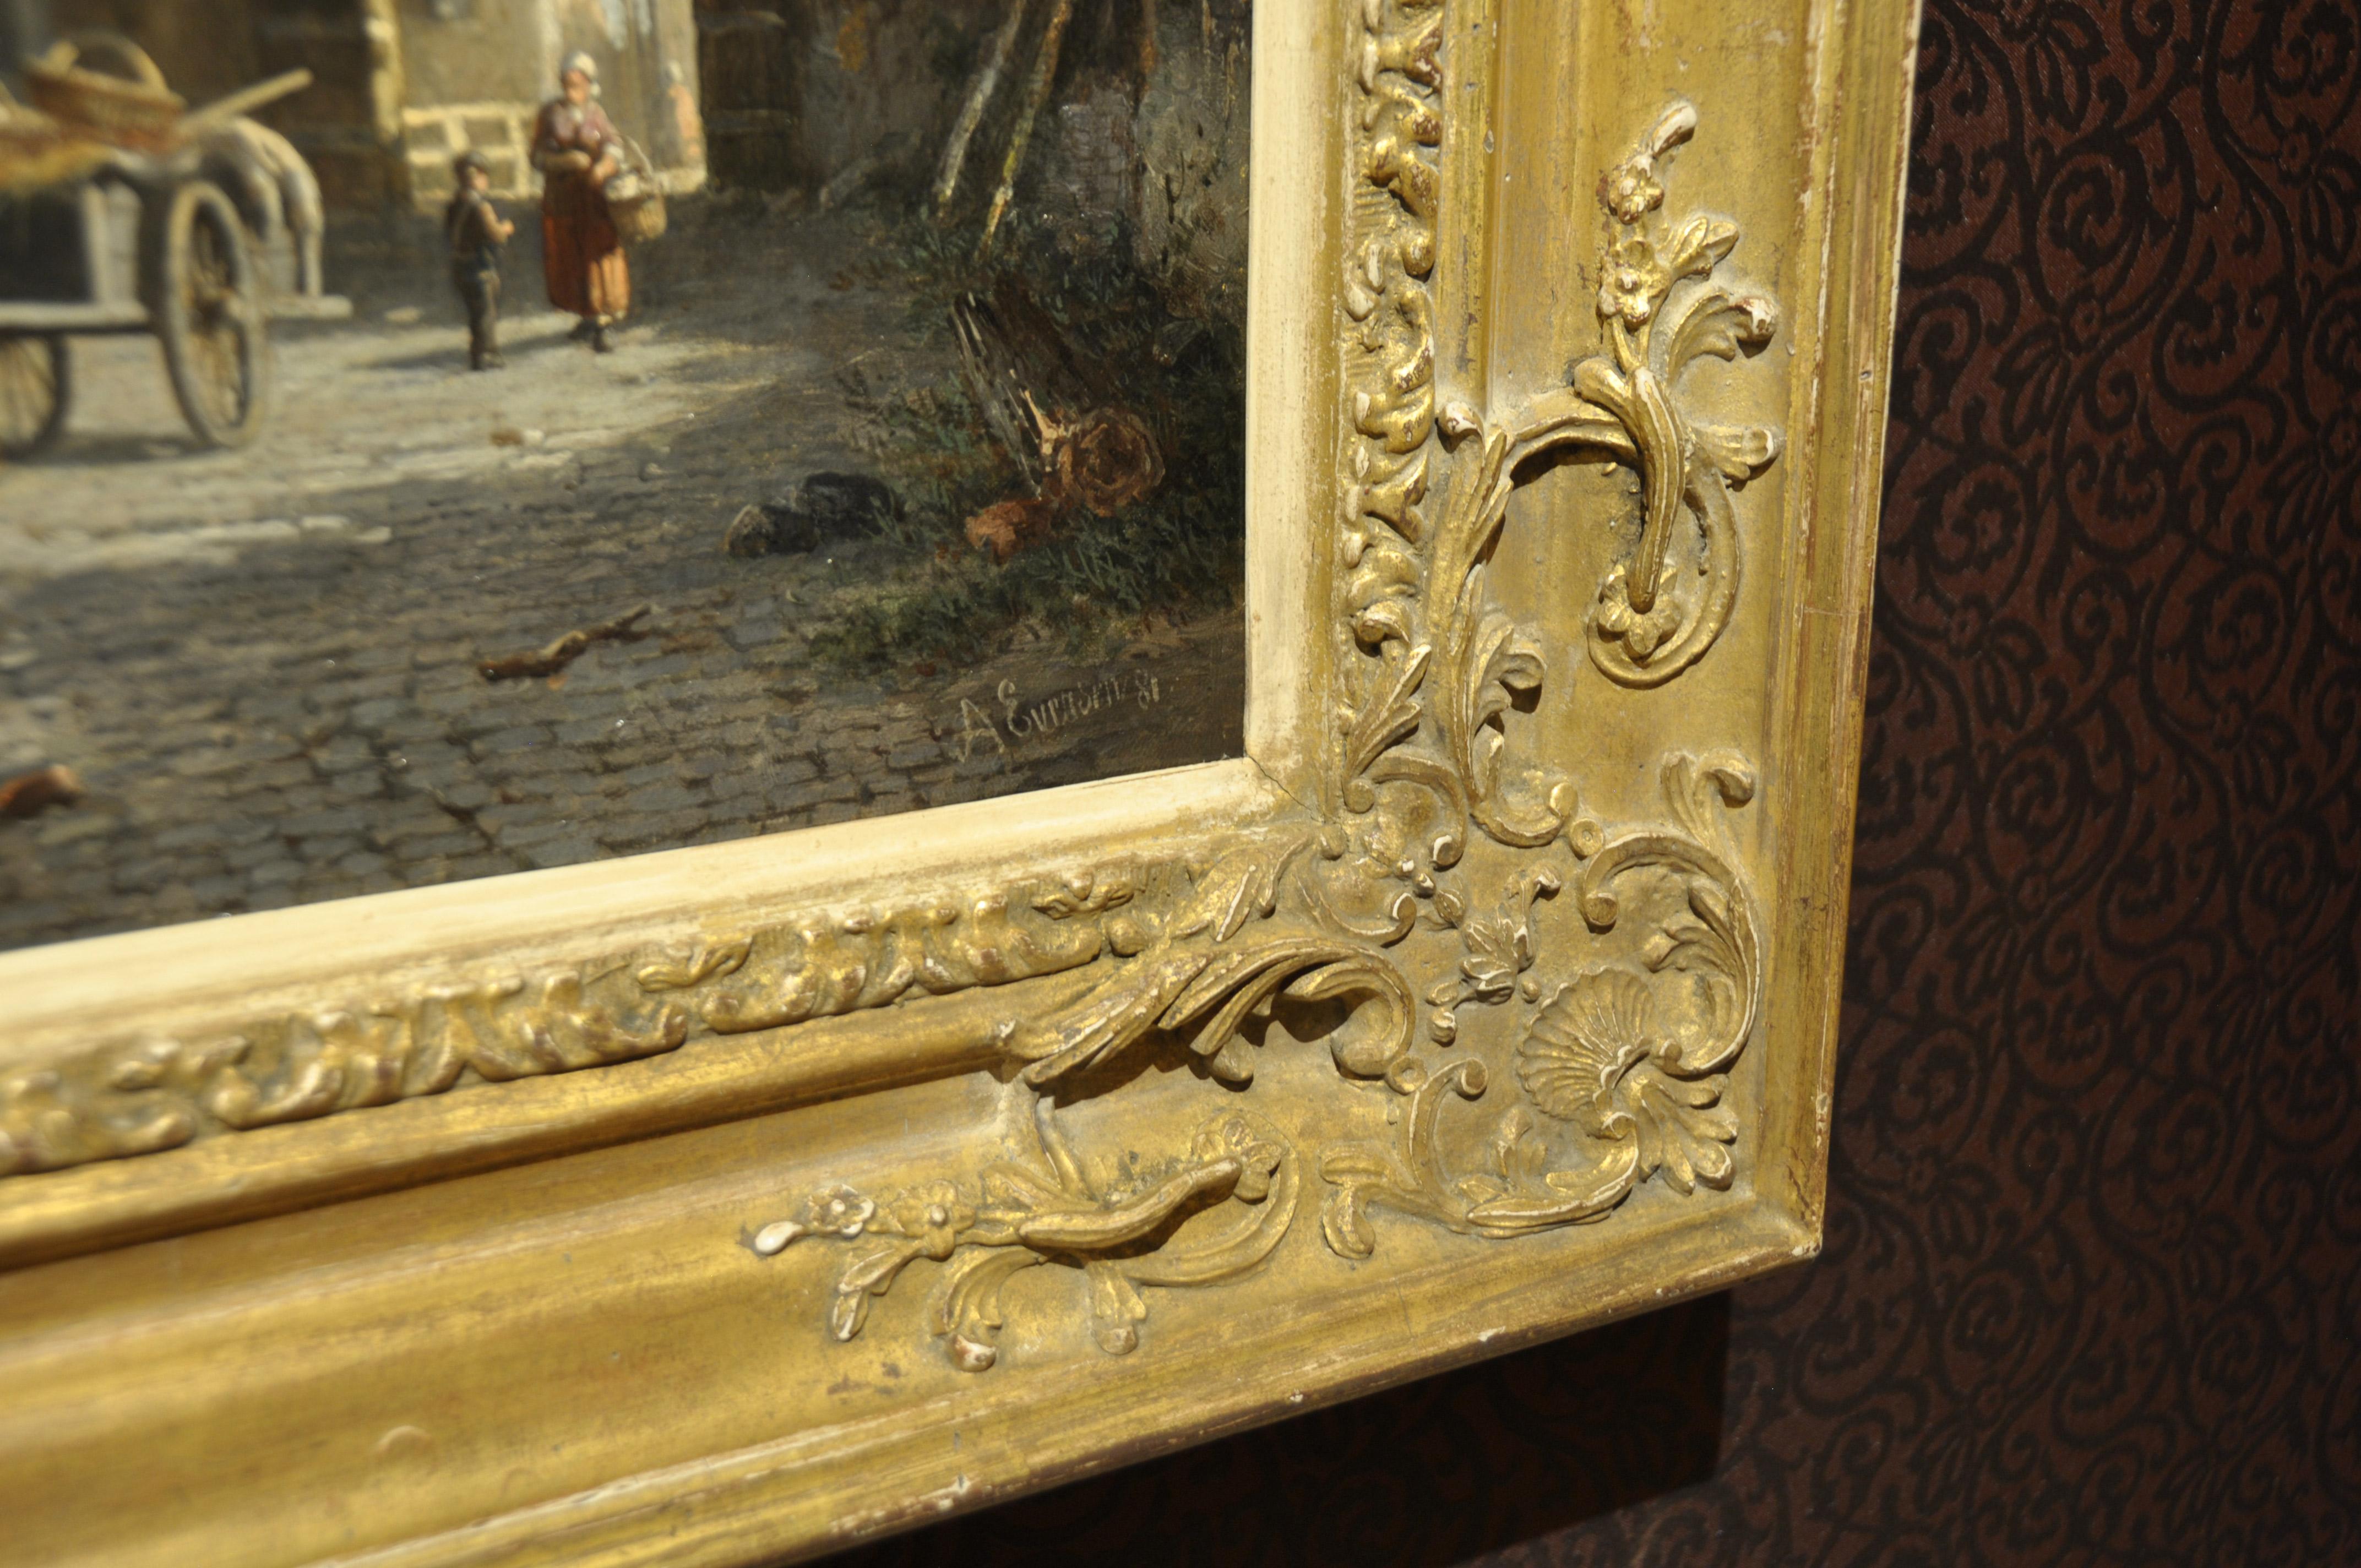 Unique 19th Century Oil Painting (57.5 x 47 cm) by Dutch Painter A. Eversen In Good Condition For Sale In Tilburg, Brabant